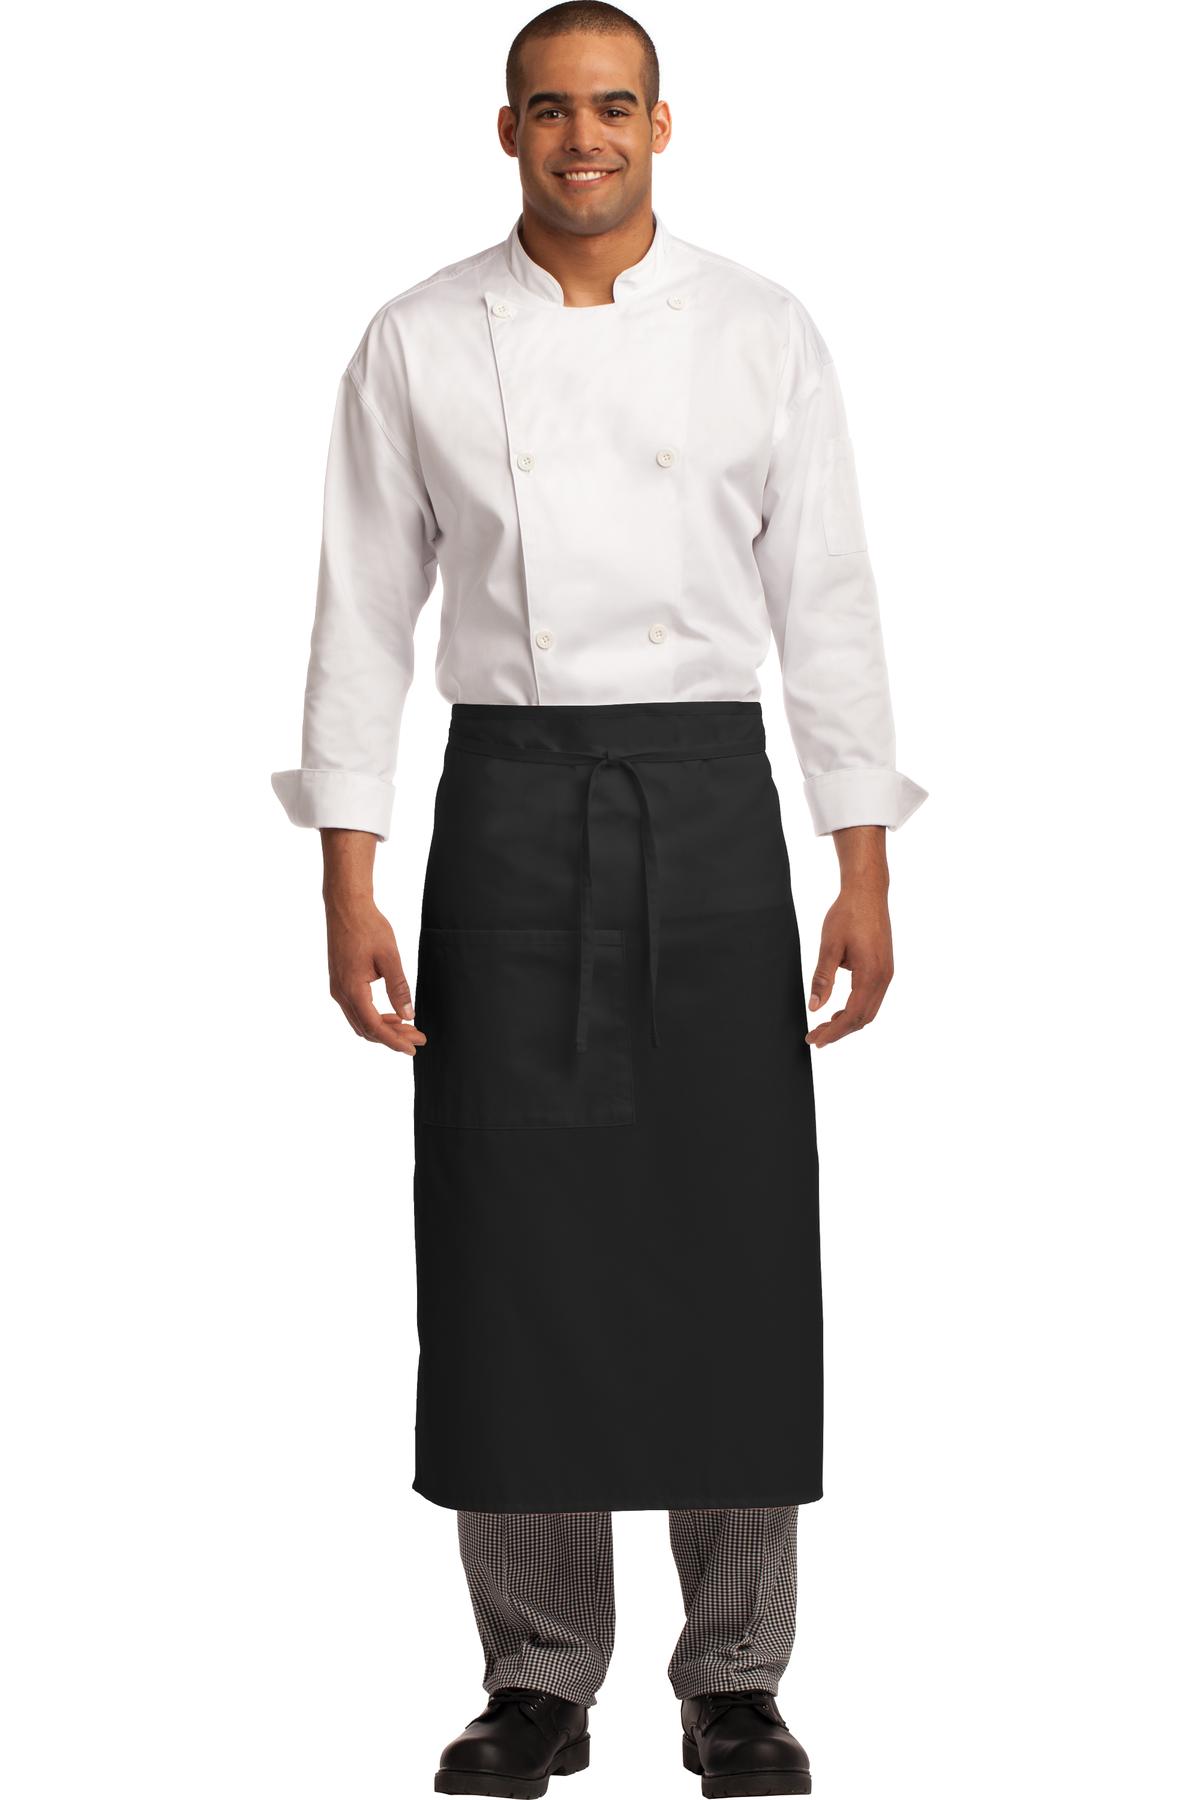 Port Authority Easy Care Full Bistro Apron with Stain Release-Port Authority